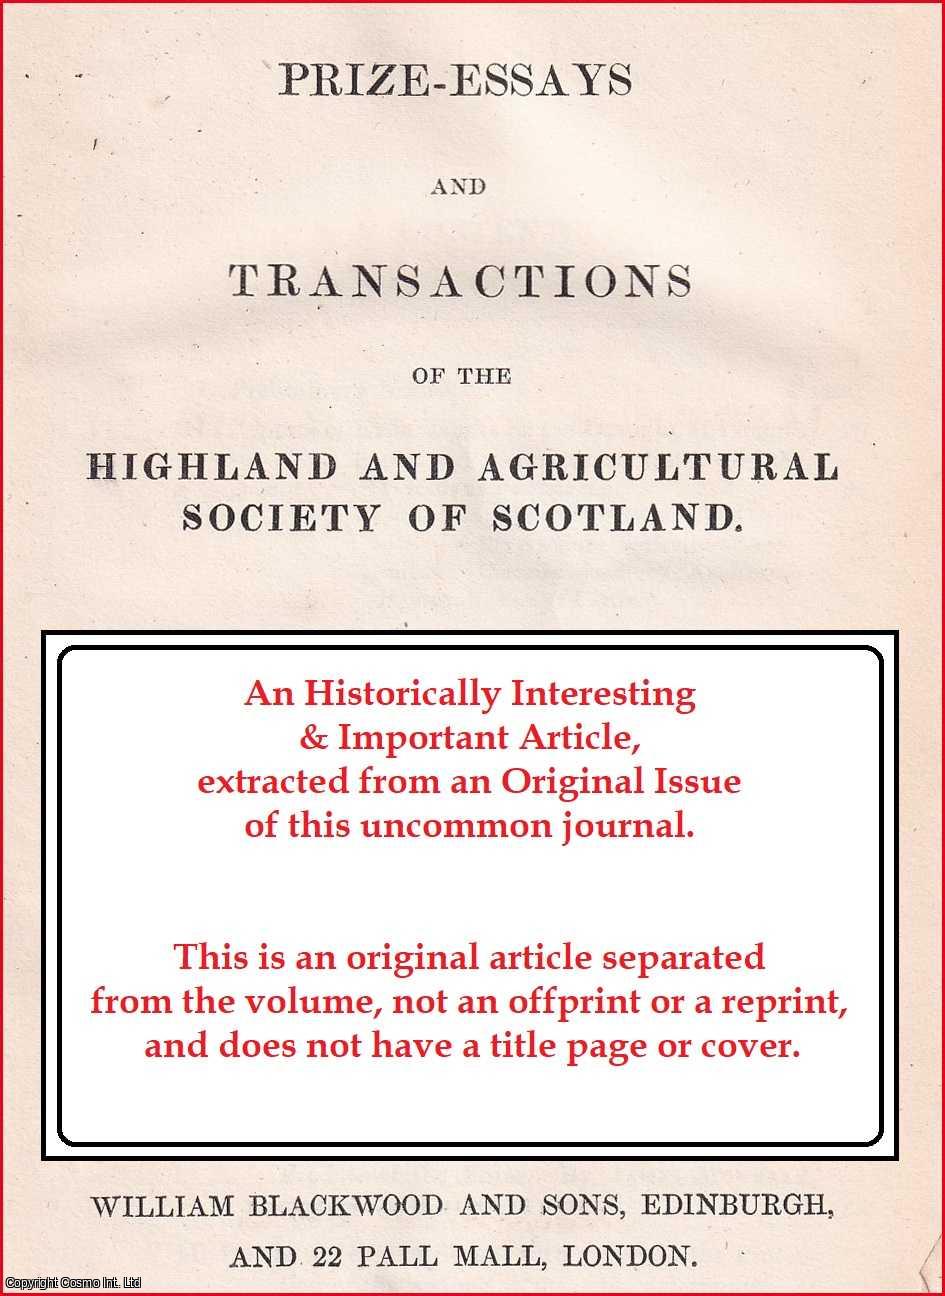 Mr. John Wallace, Mansfield House, Cumnock, Ayrshire. - The Method of Calcining Limestone in some of the Limestone Quarries in Scotland. An uncommon original article from the Prize Essays and Transactions of the Highland Society of Scotland, 1837.